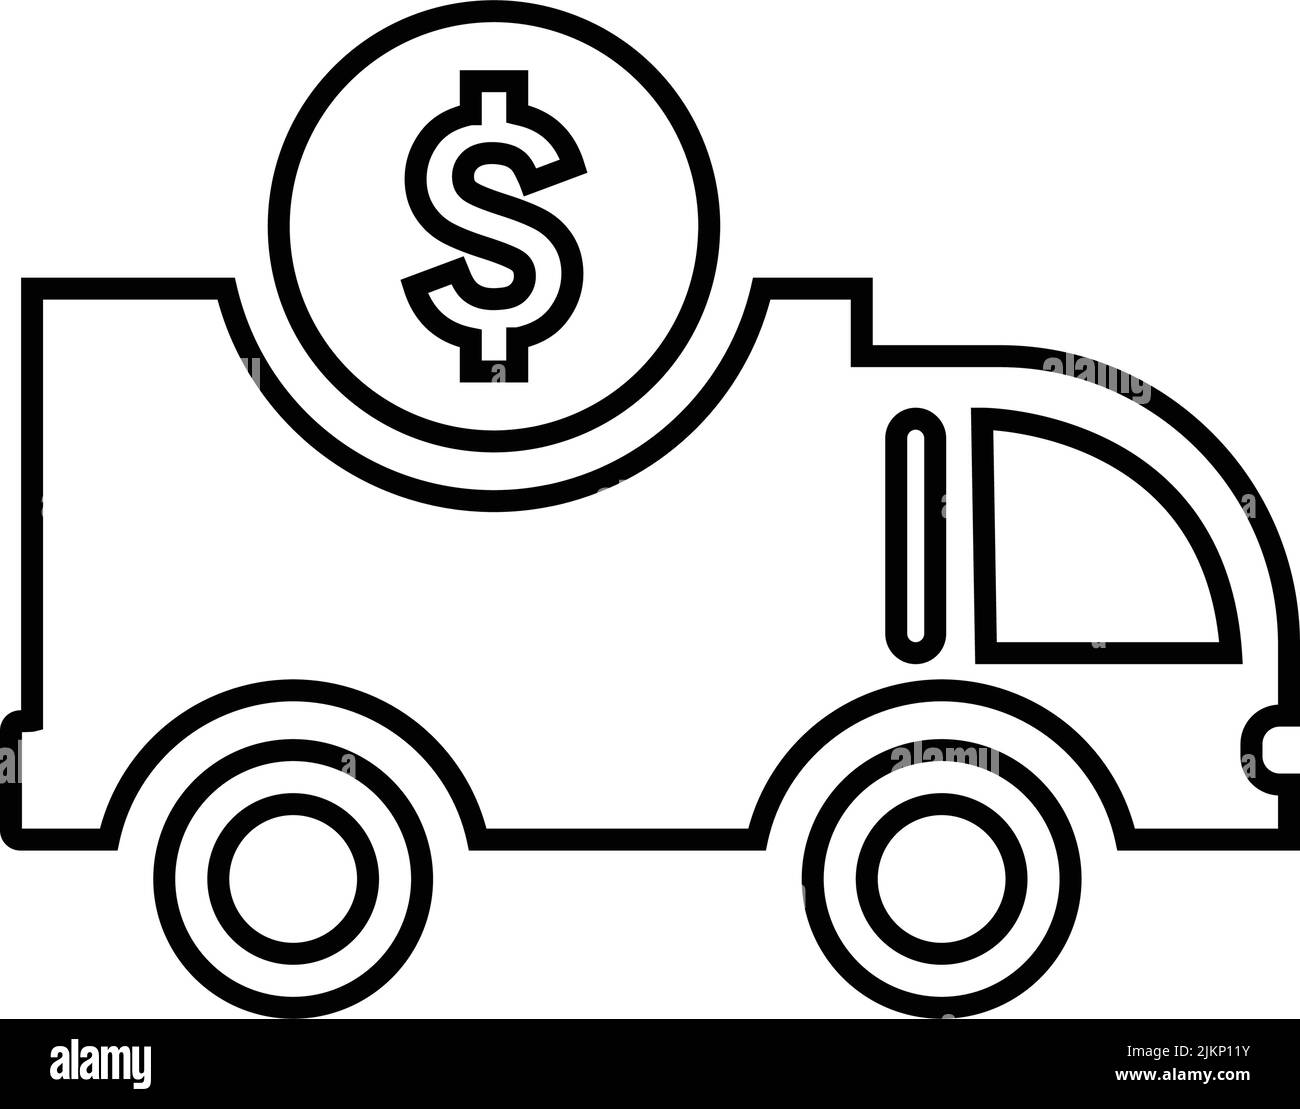 Transportation, delivery, collector car icon - Vector EPS file. Perfect use for print media, web, stock images, commercial use or any kind of design p Stock Vector